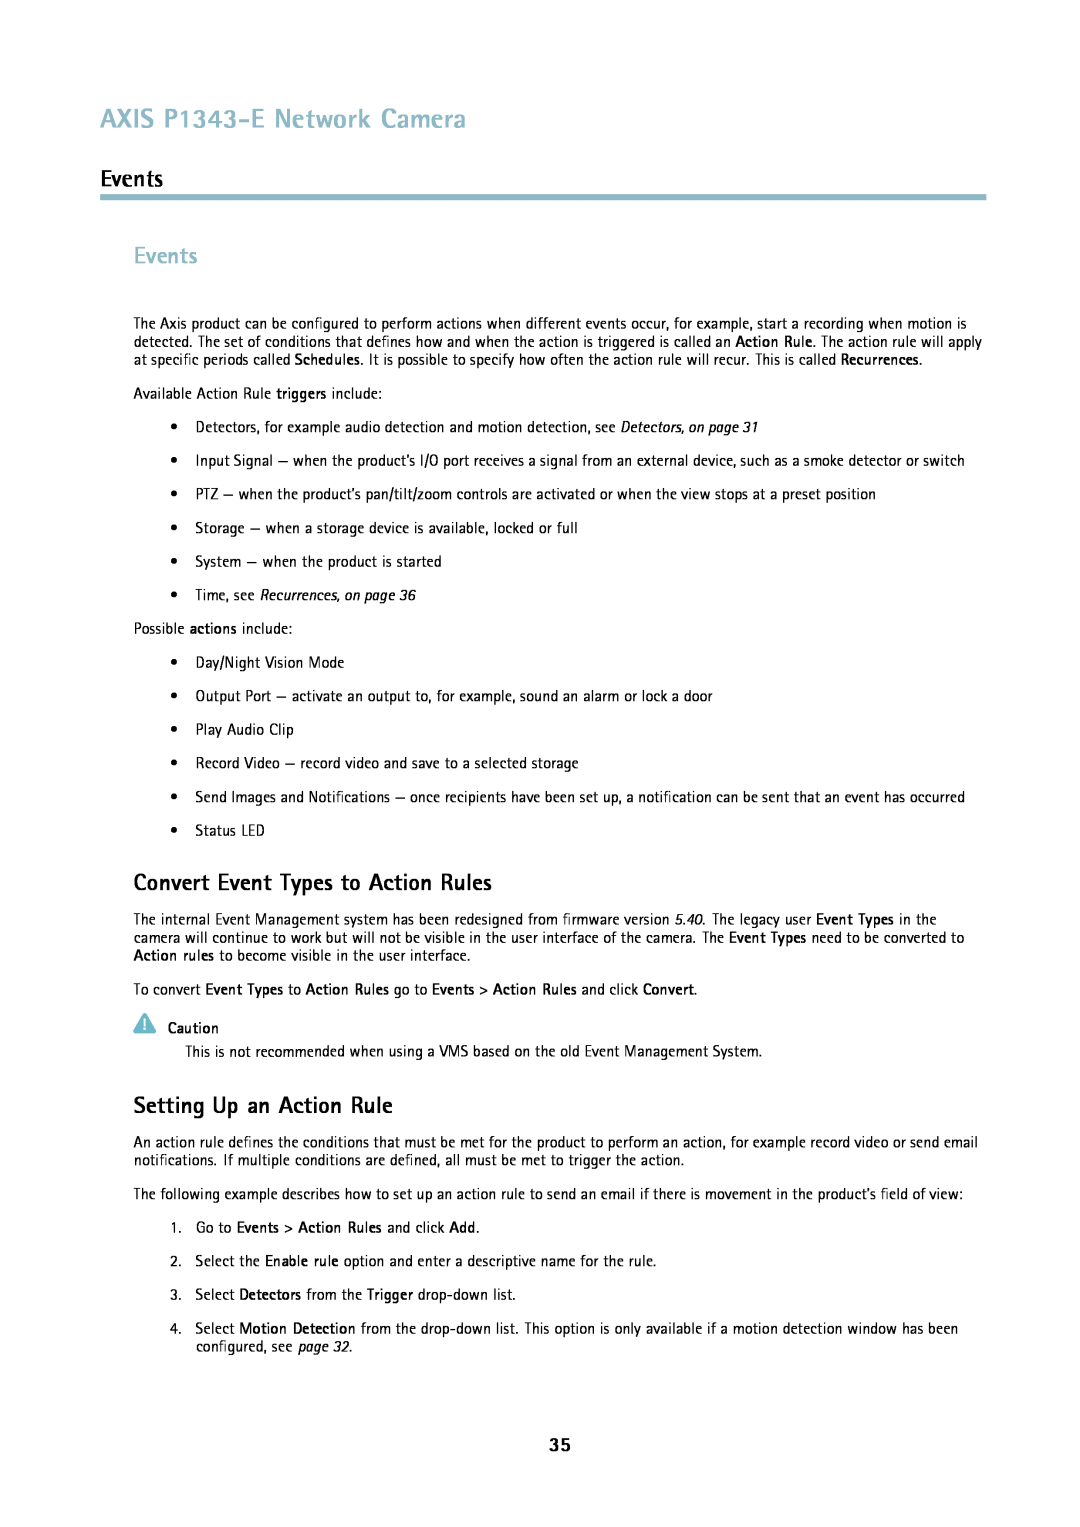 Axis Communications P1343-E user manual Events, Convert Event Types to Action Rules, Setting Up an Action Rule 